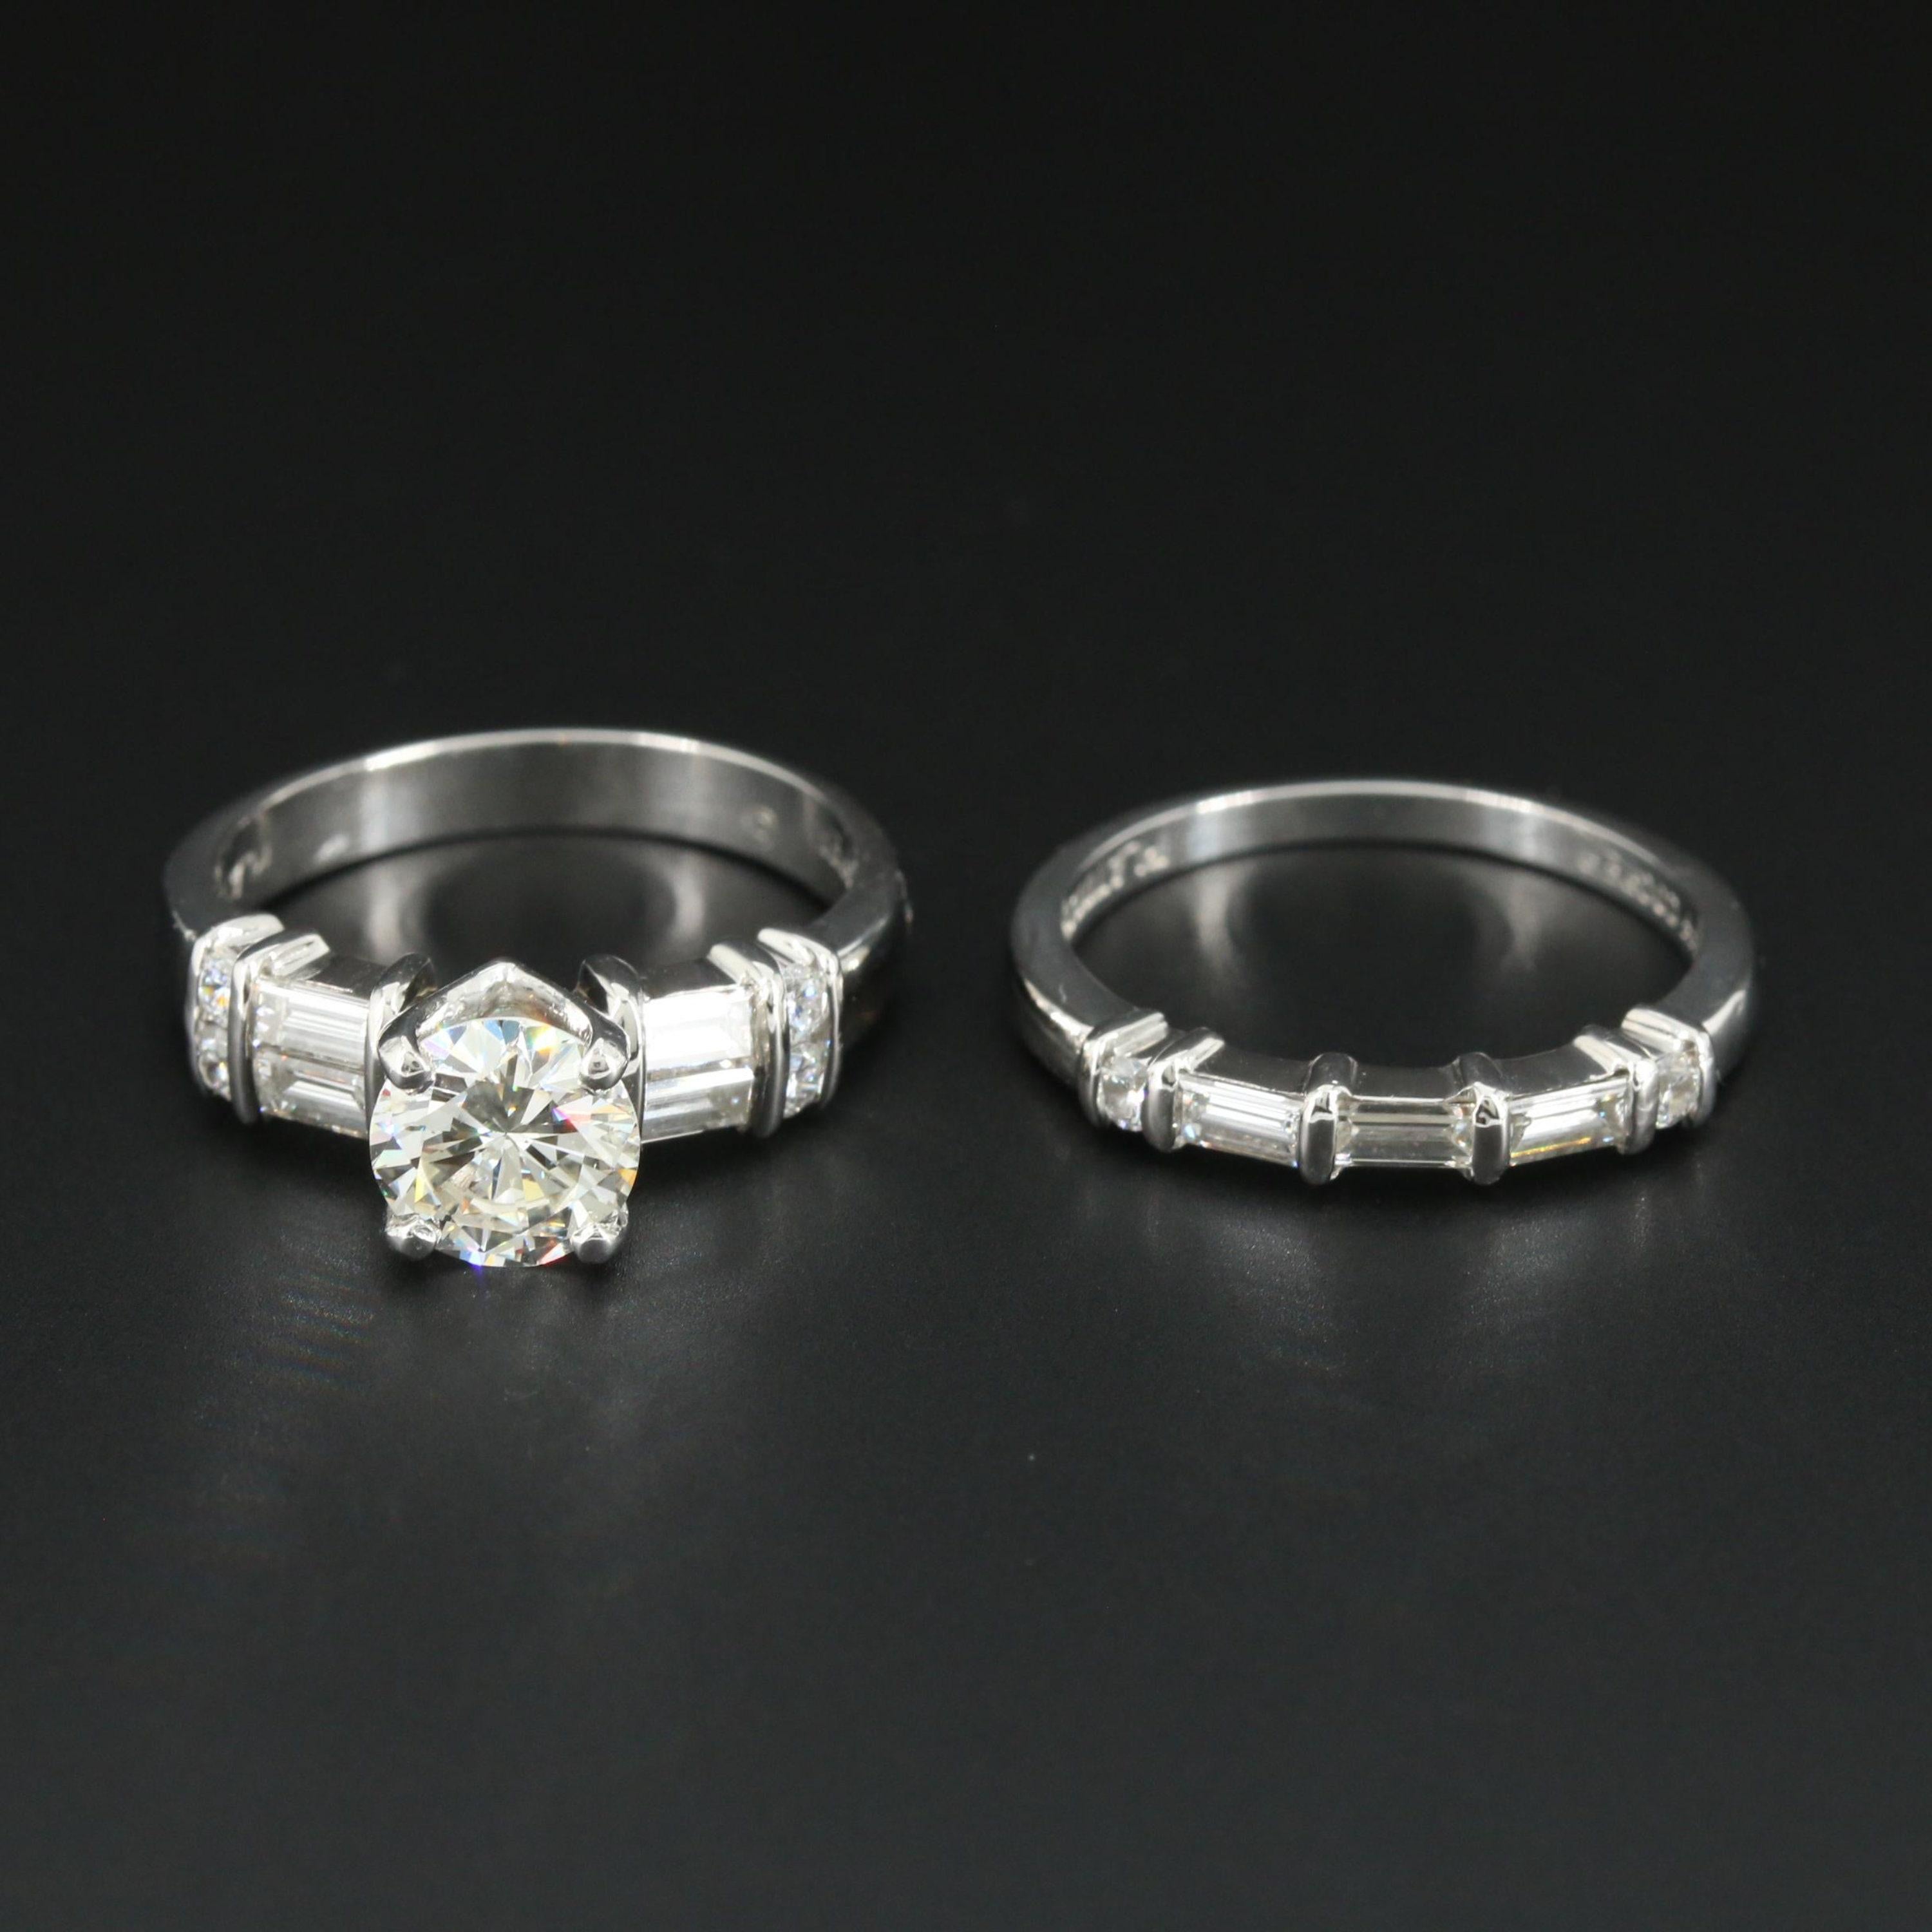 For Sale:  Certified 3.3 CT Diamond Art Deco Style Bridal Ring Set Diamond Engagement Ring 2